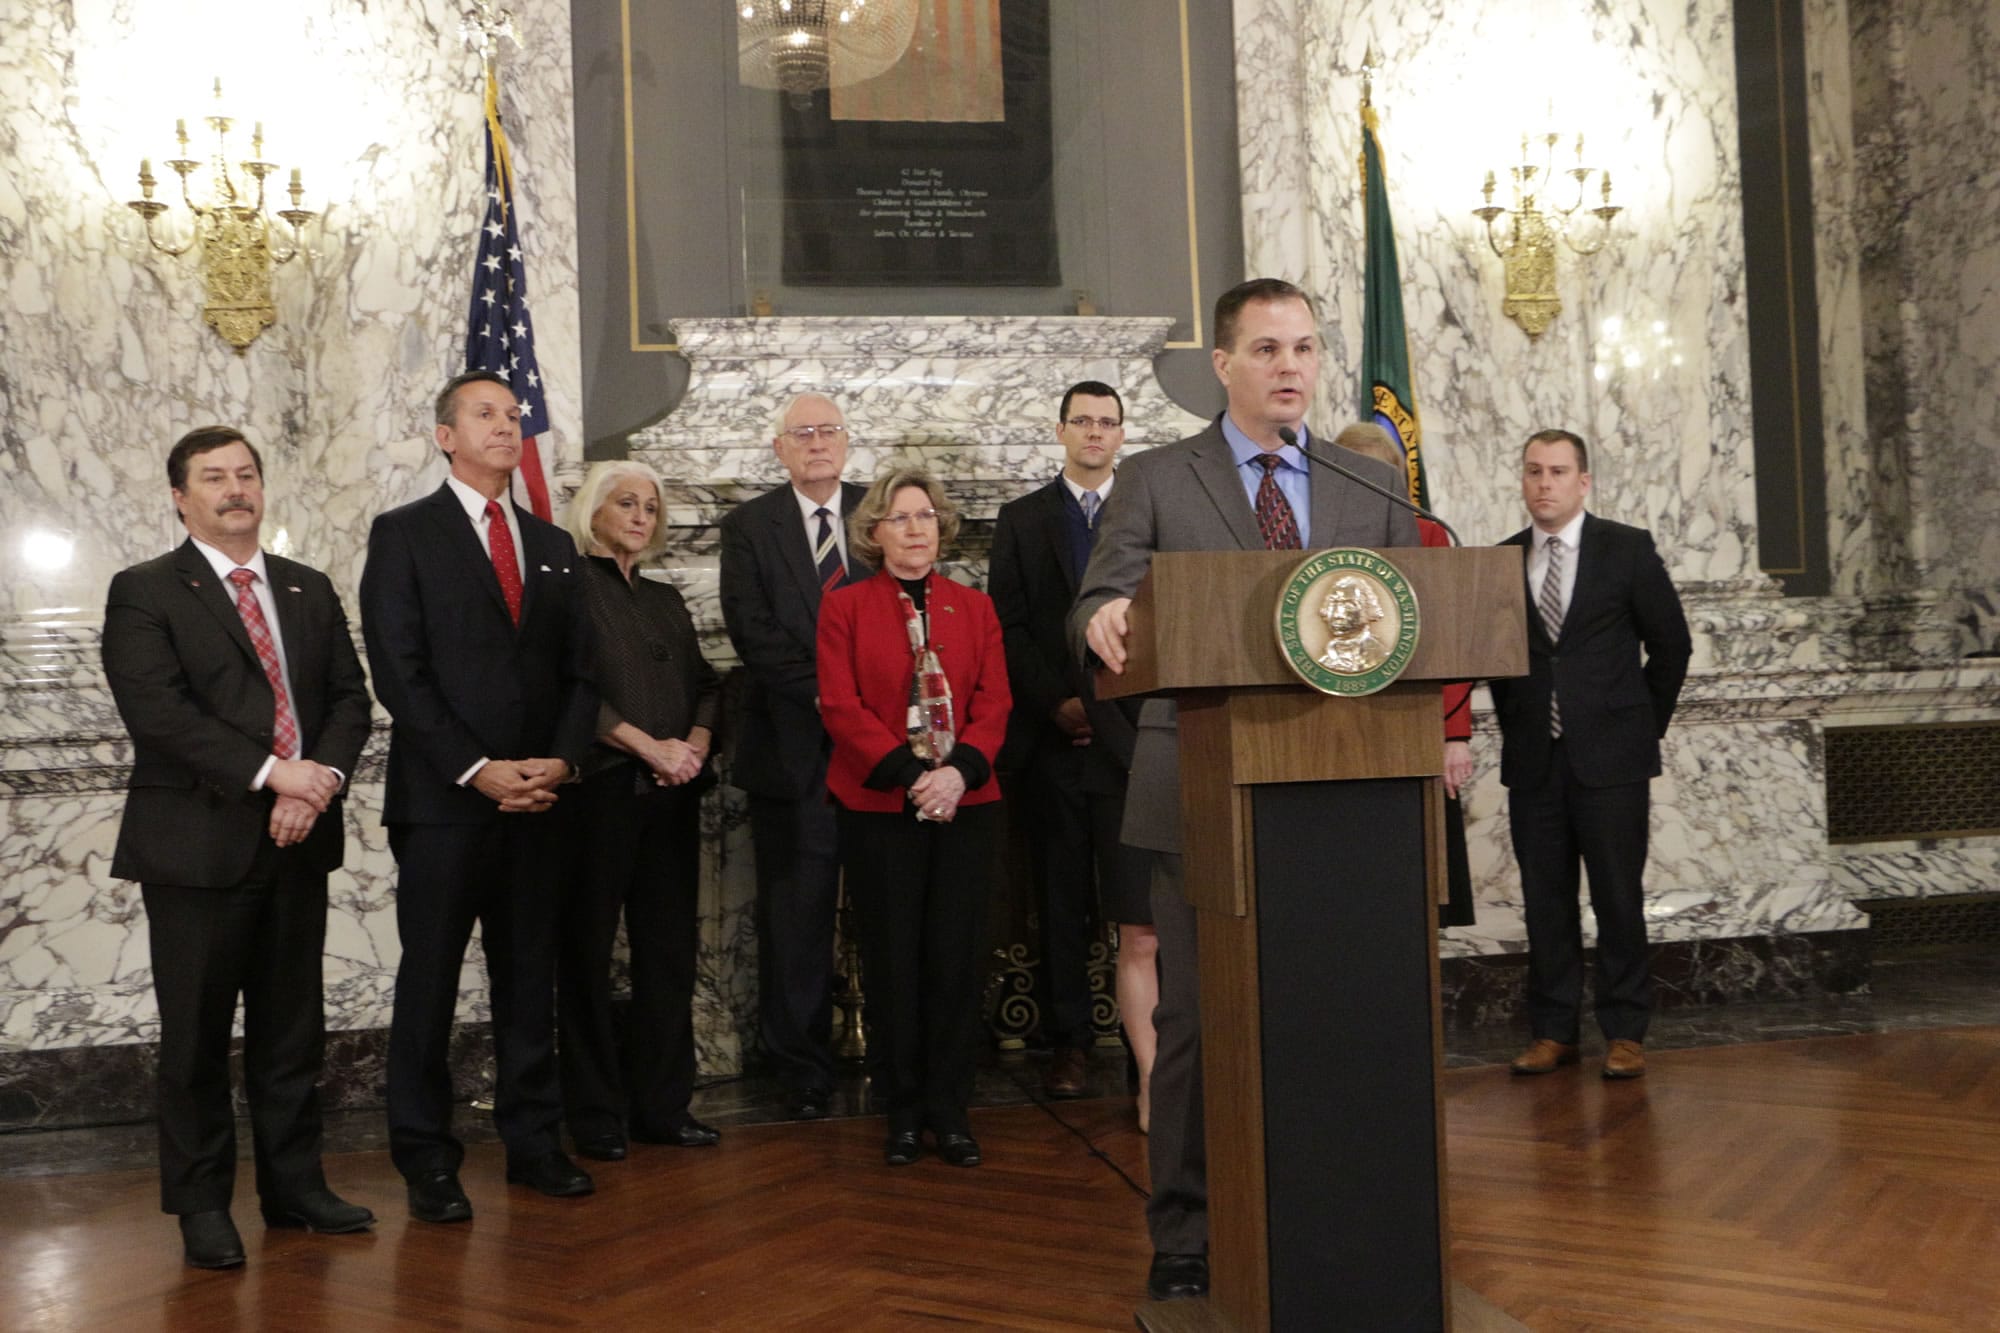 Sen. John Braun, joined by fellow Republican senators, speaks at a news conference about a two-year $43 billion budget proposal, Tuesday, March 21, 2017 in Olympia, Wash. The budget puts an additional $1.8 billion toward education.